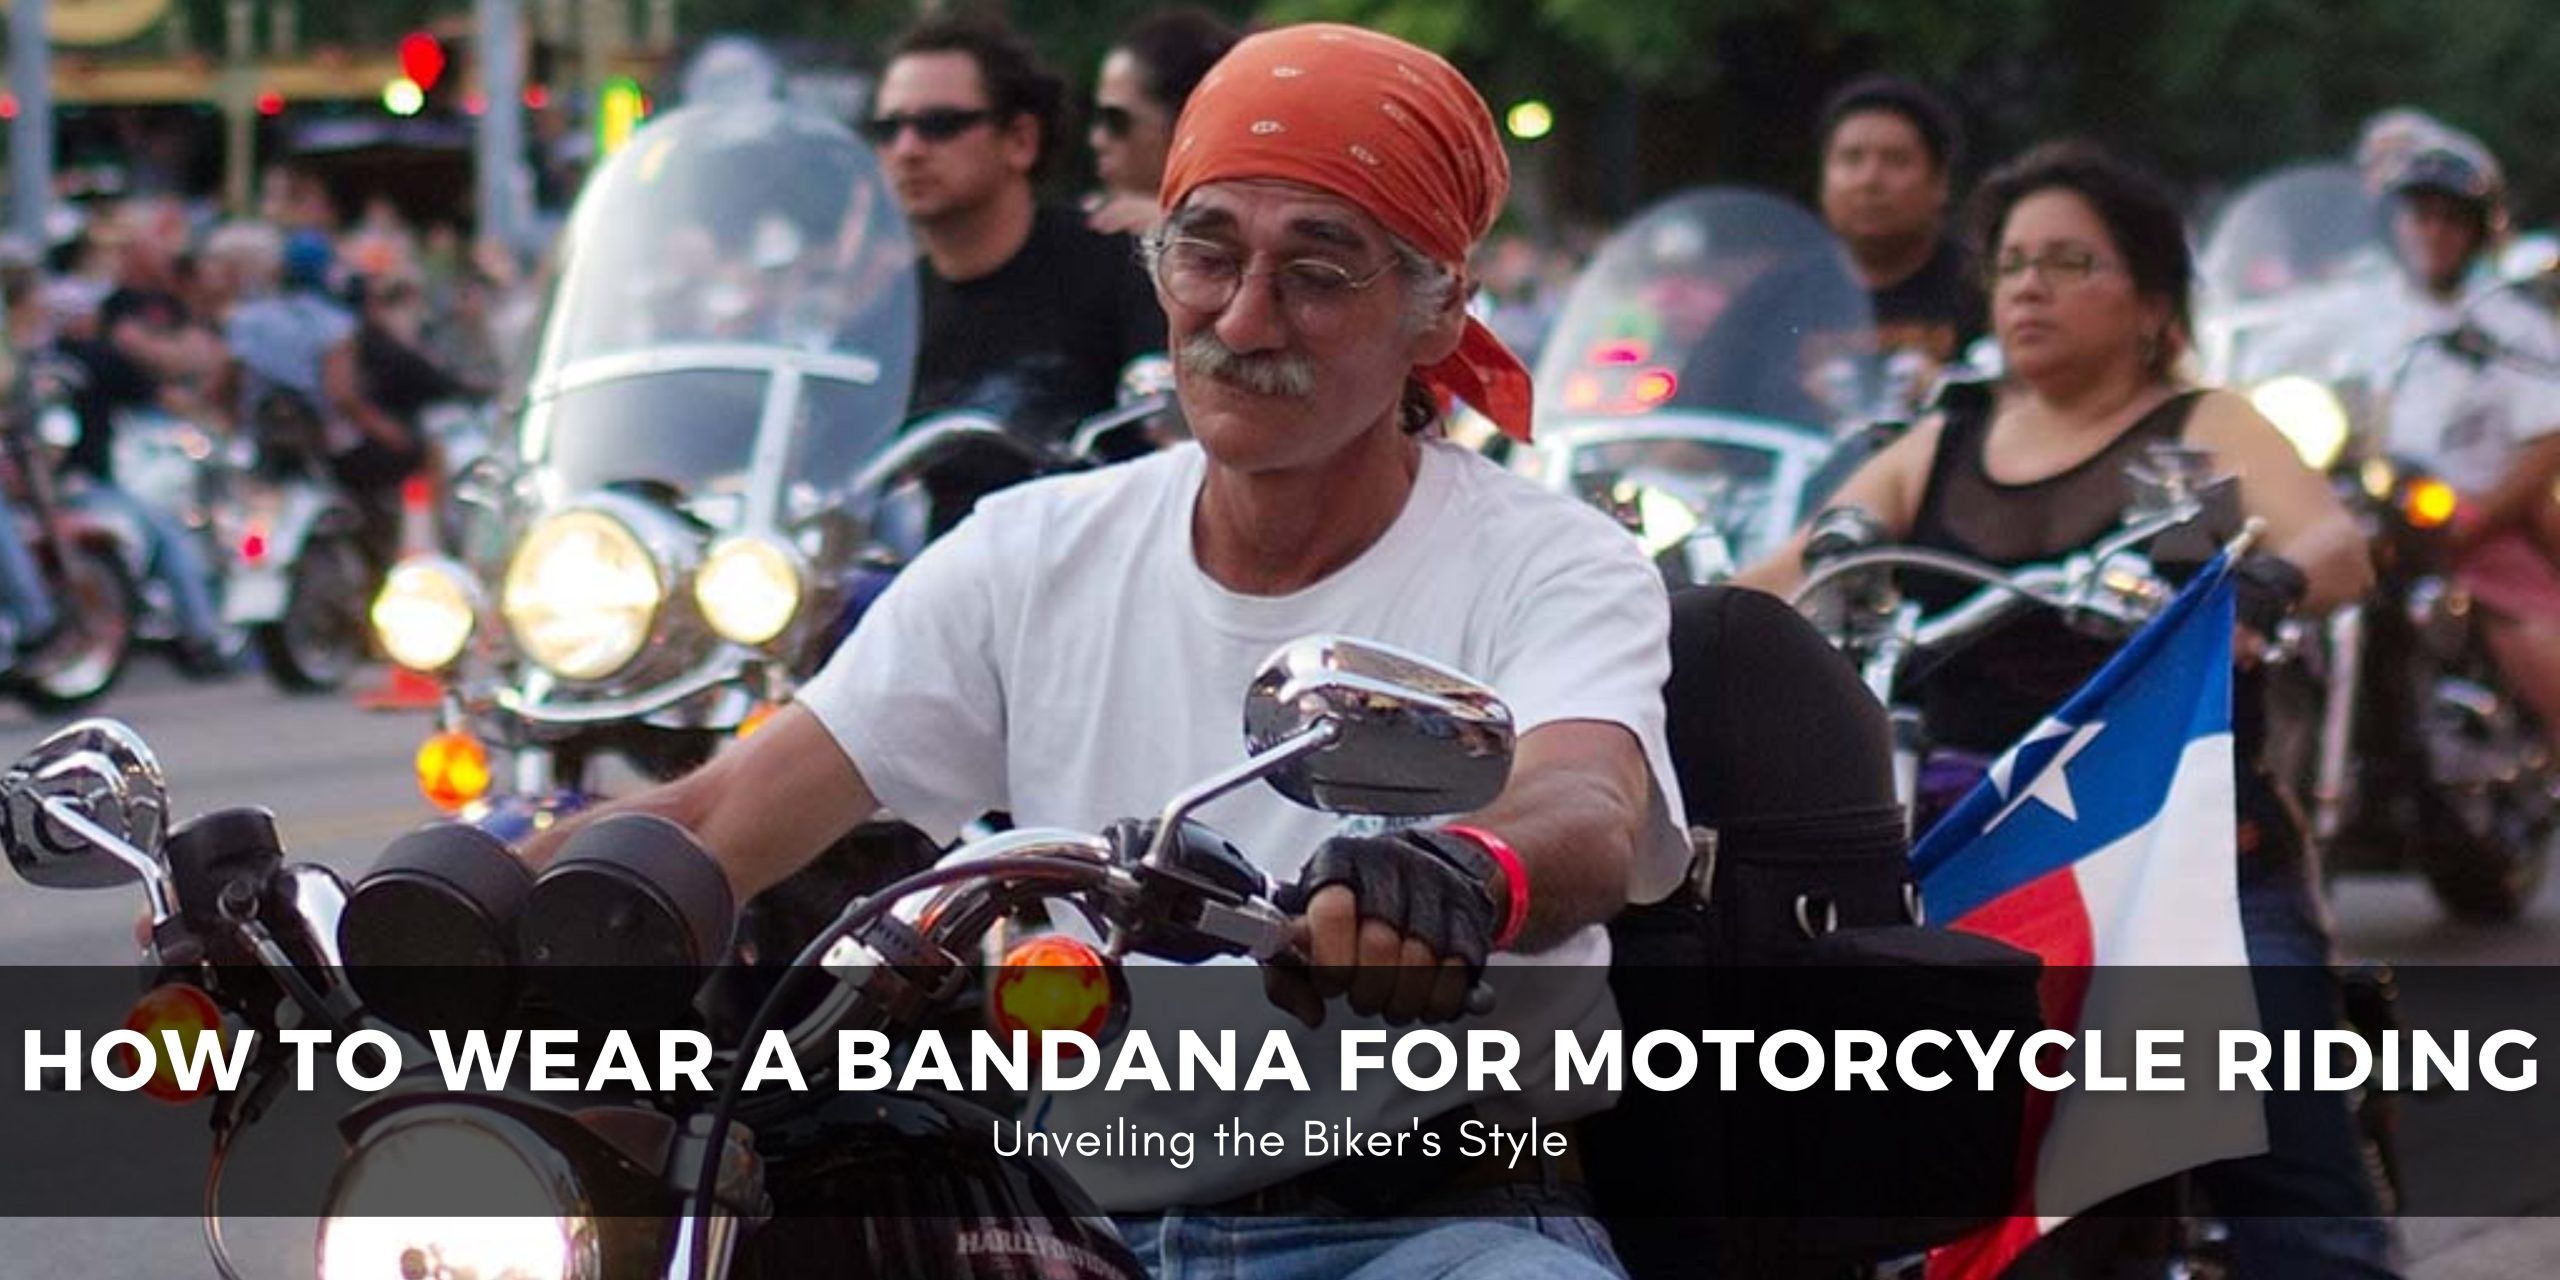 How to Wear a Bandana for Motorcycle Riding